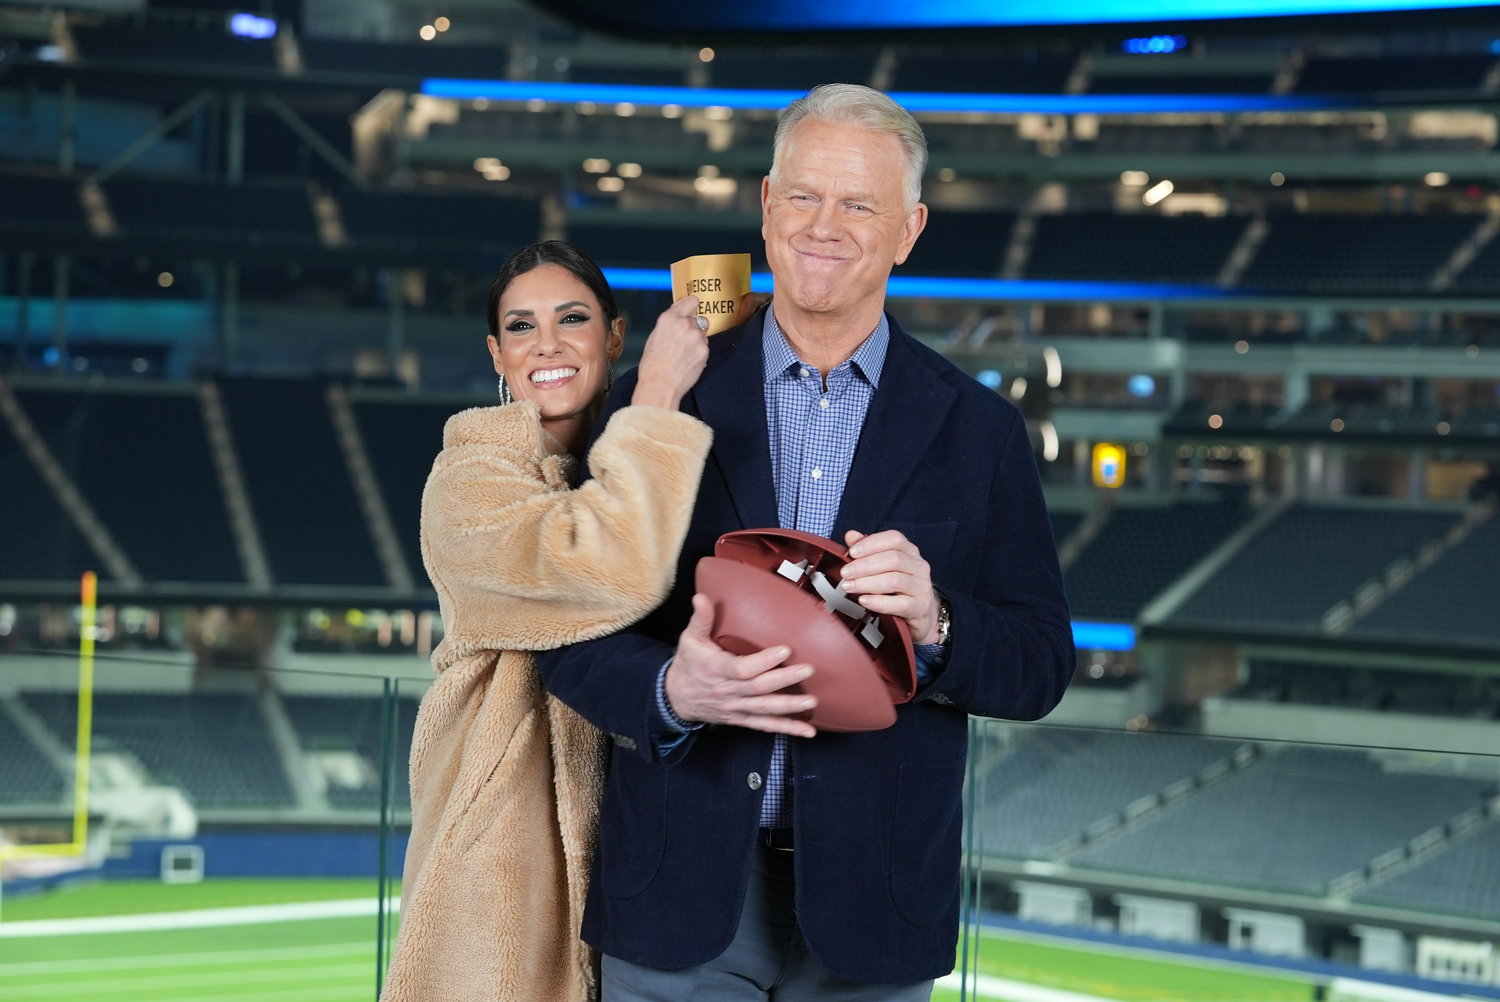 Daniela Ruah, star of CBS’s “NCIS: Los Angeles,” and Boomer Esiason, analyst for CBS Sports’ “The NFL Today” with a selection of one of their all-time favorite Super Bowl commercials, during the film of “Super Bowl Greatest Commercials: Battle of the Decades,” produced by Film 45 and Newtown-based Juma Entertainment.